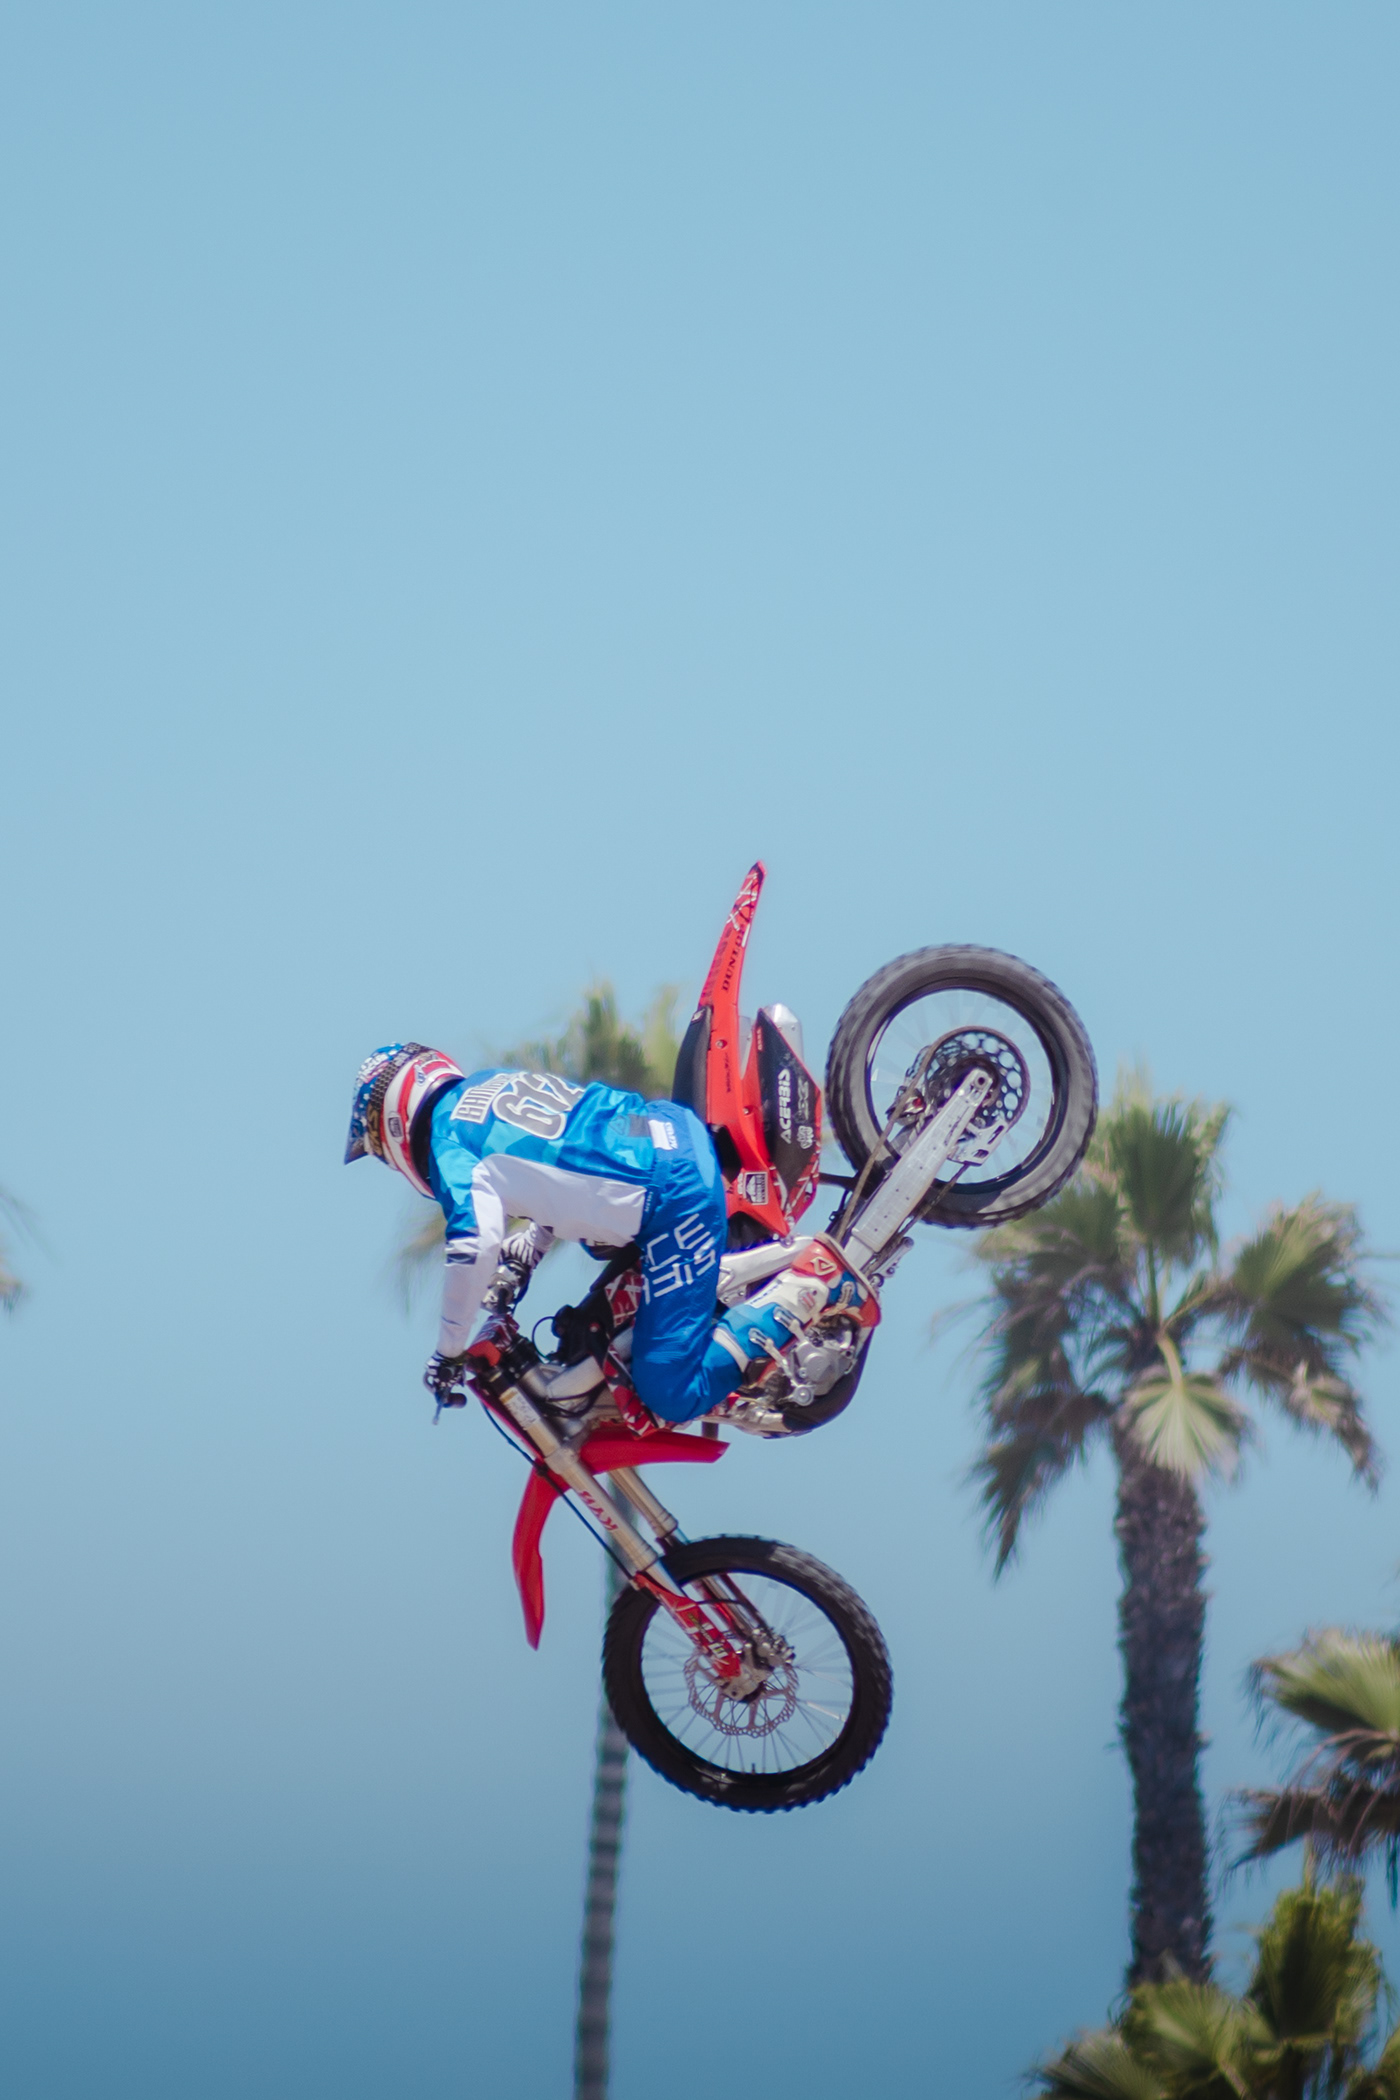 Motocross fmx Freestyle Motocross action sports sports photography